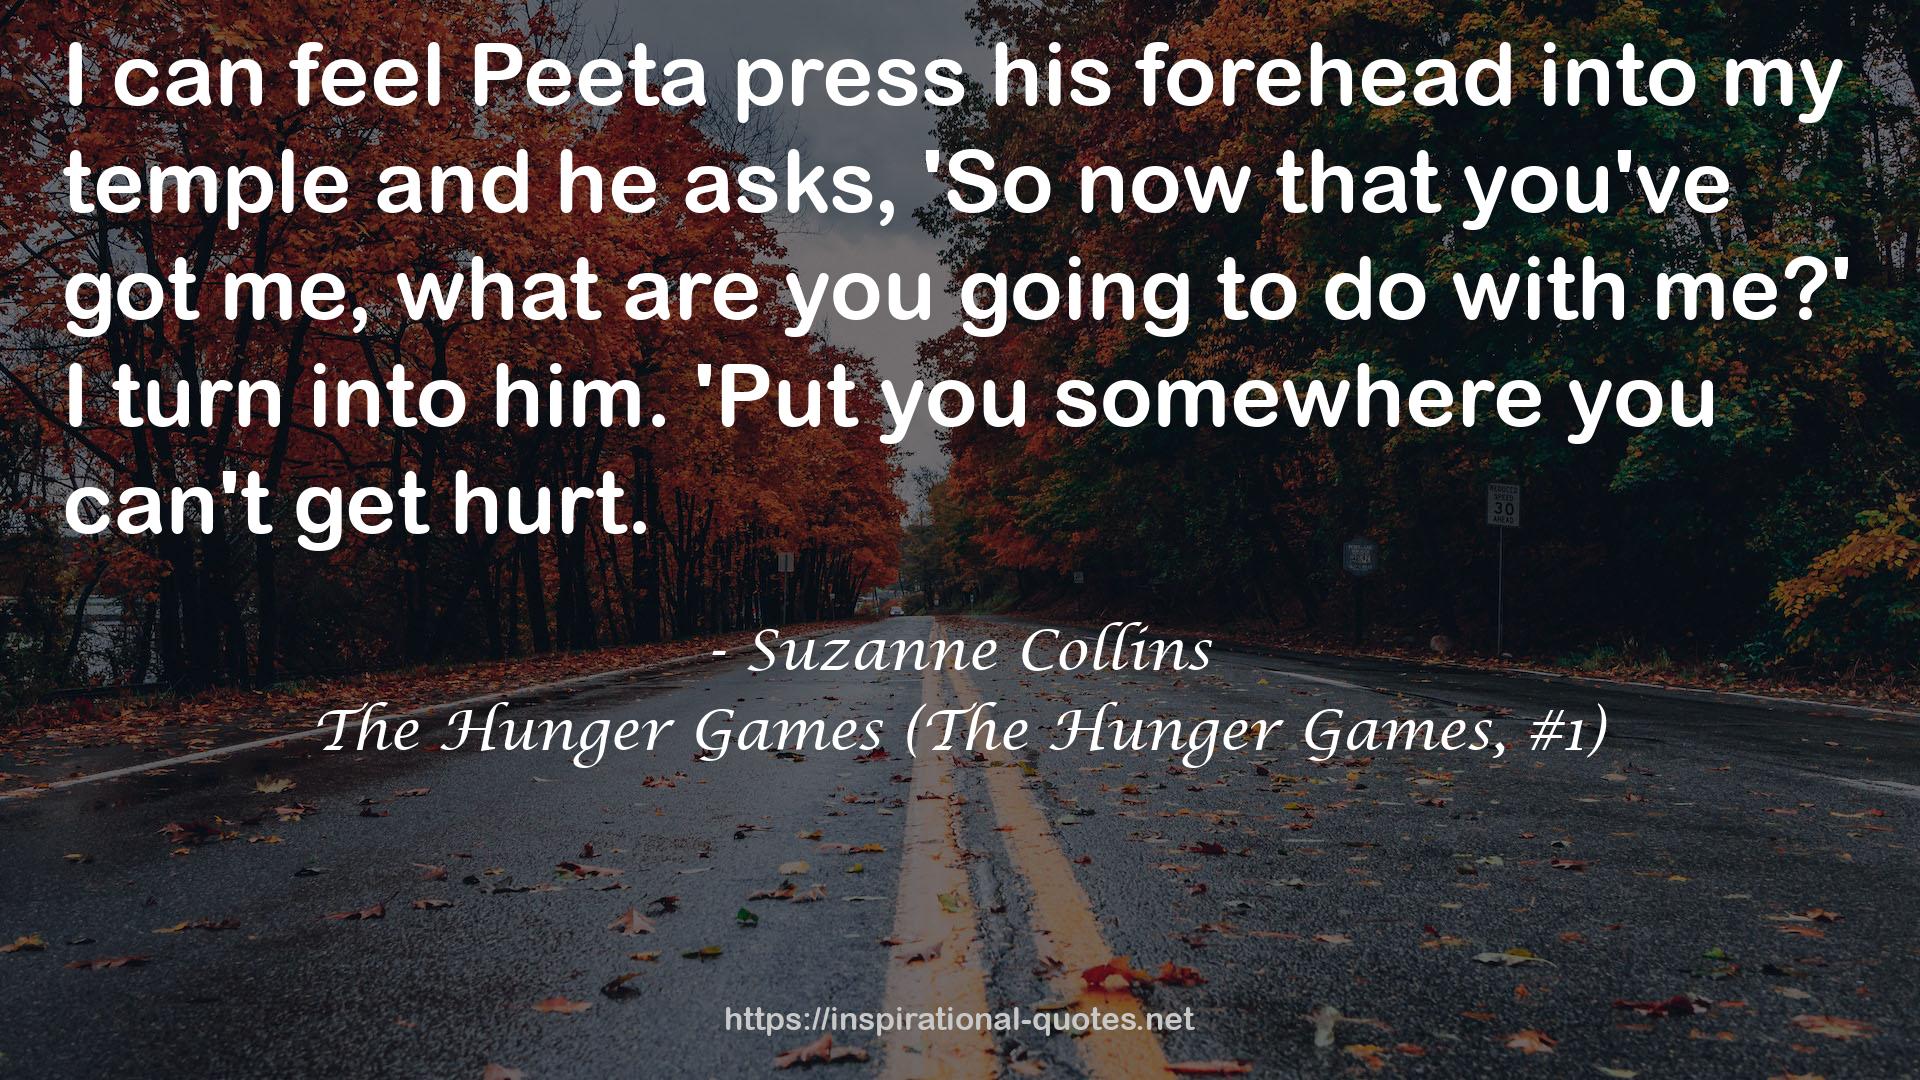 The Hunger Games (The Hunger Games, #1) QUOTES